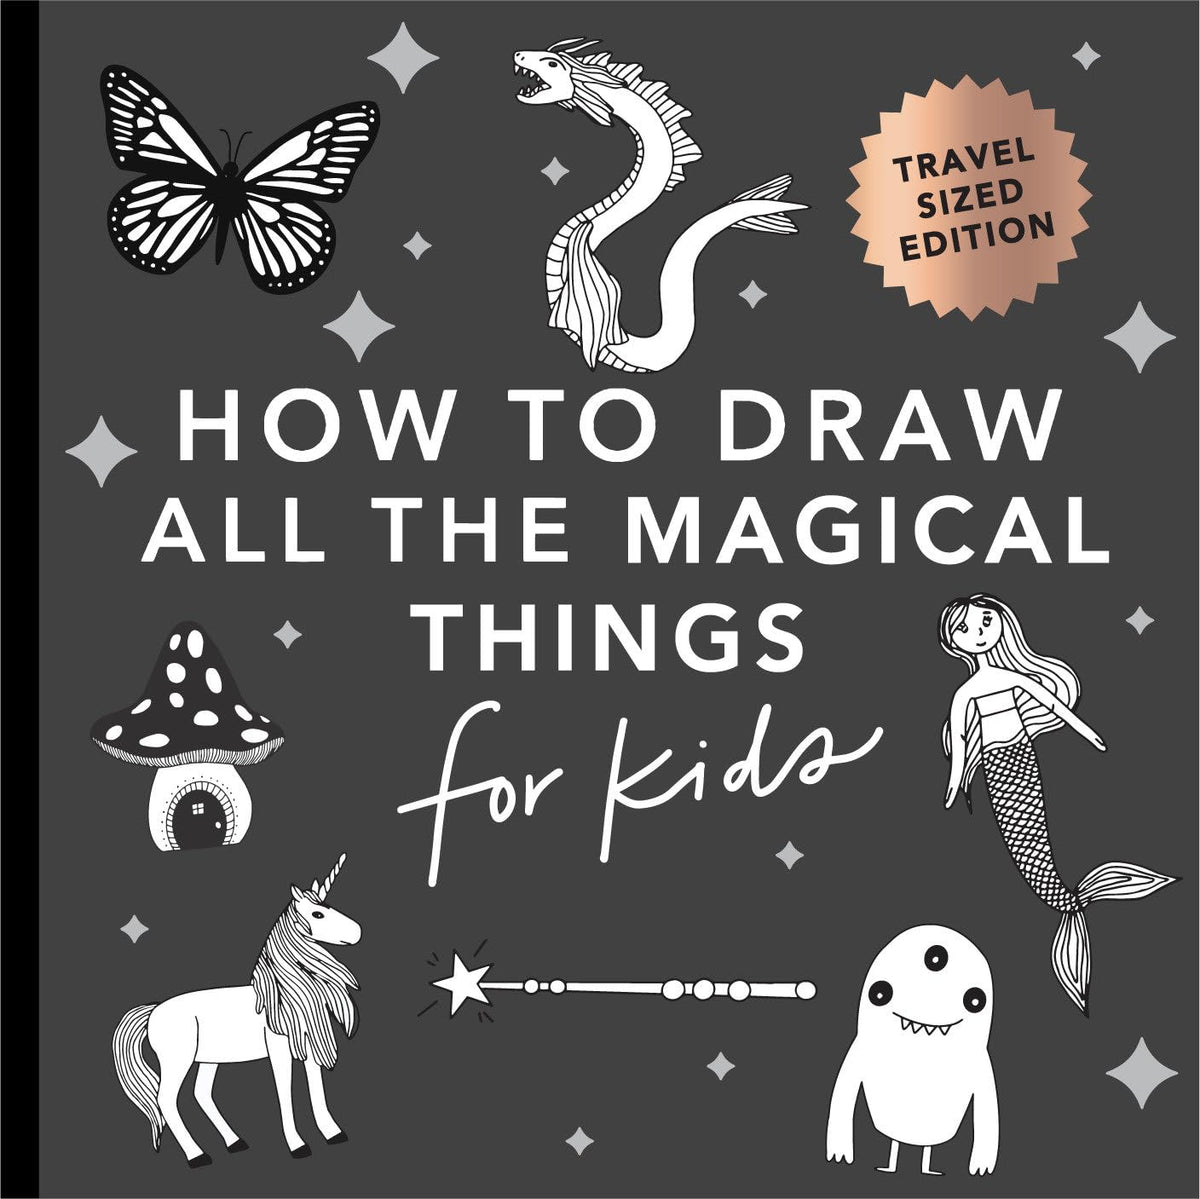 How to Draw: Magical Things